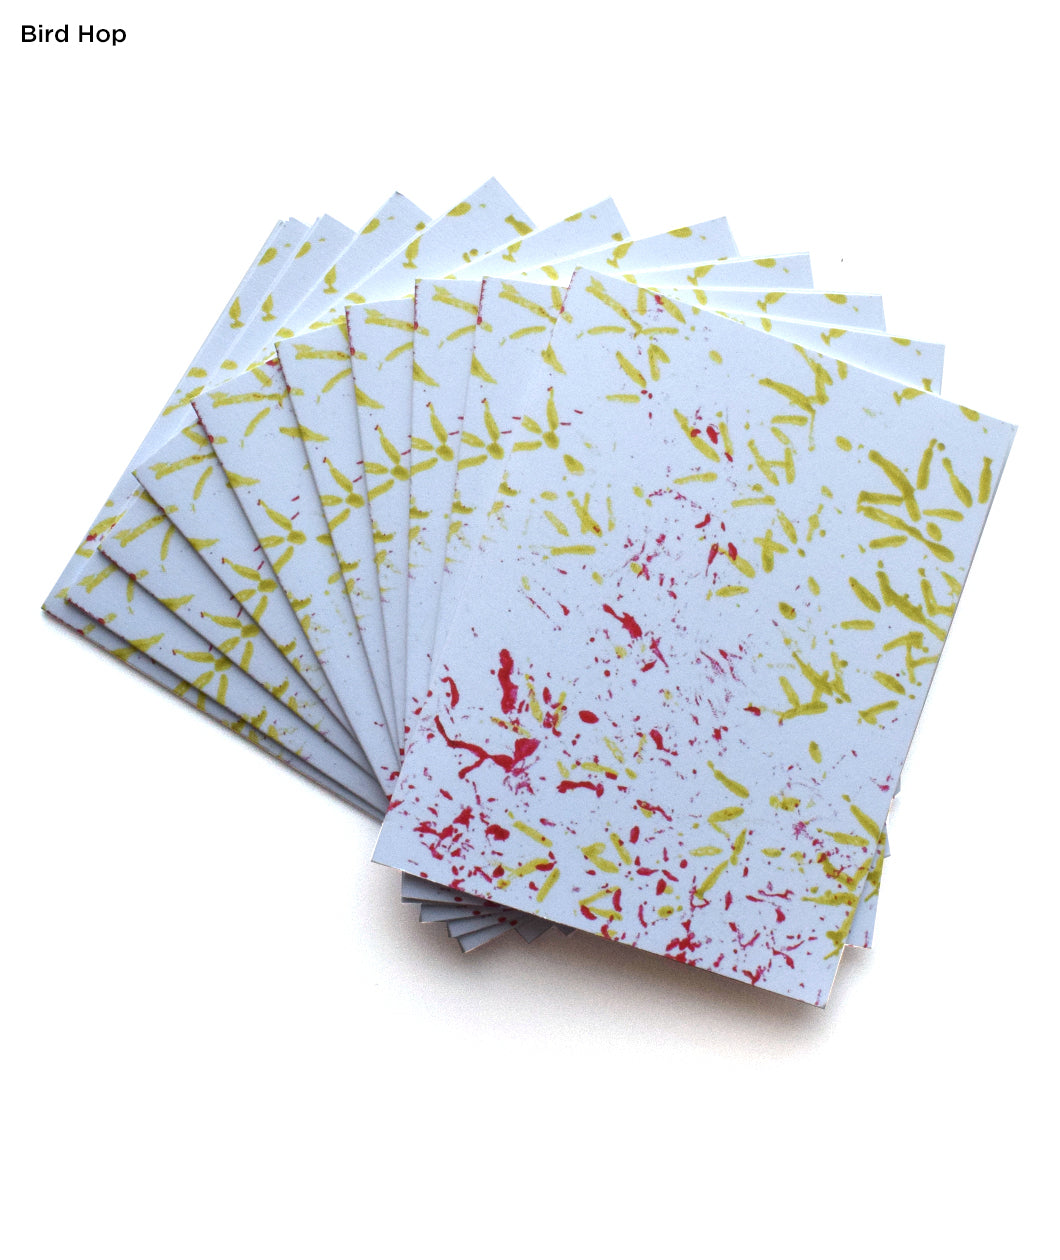 Yellow bird footprints and red sprinkle of seeds. Multple greeting cards are fanned out from behind. “Bird Hop” is written in top left of image in black sans serif font indicating which greeting card is being shown - from Animal Wonders